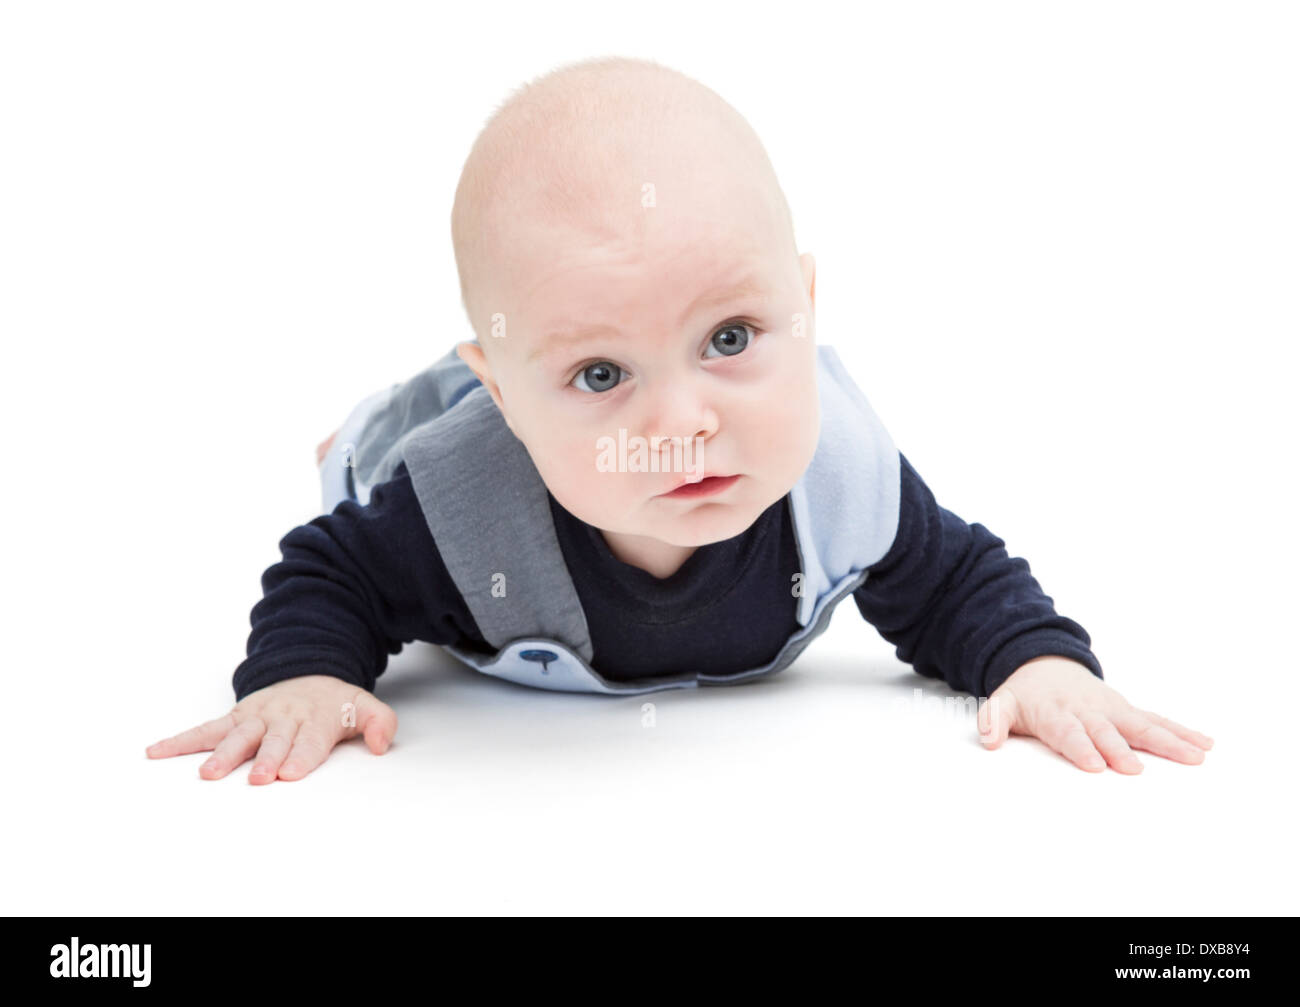 6 month old baby crawling on white floor. isolated on white background Stock Photo